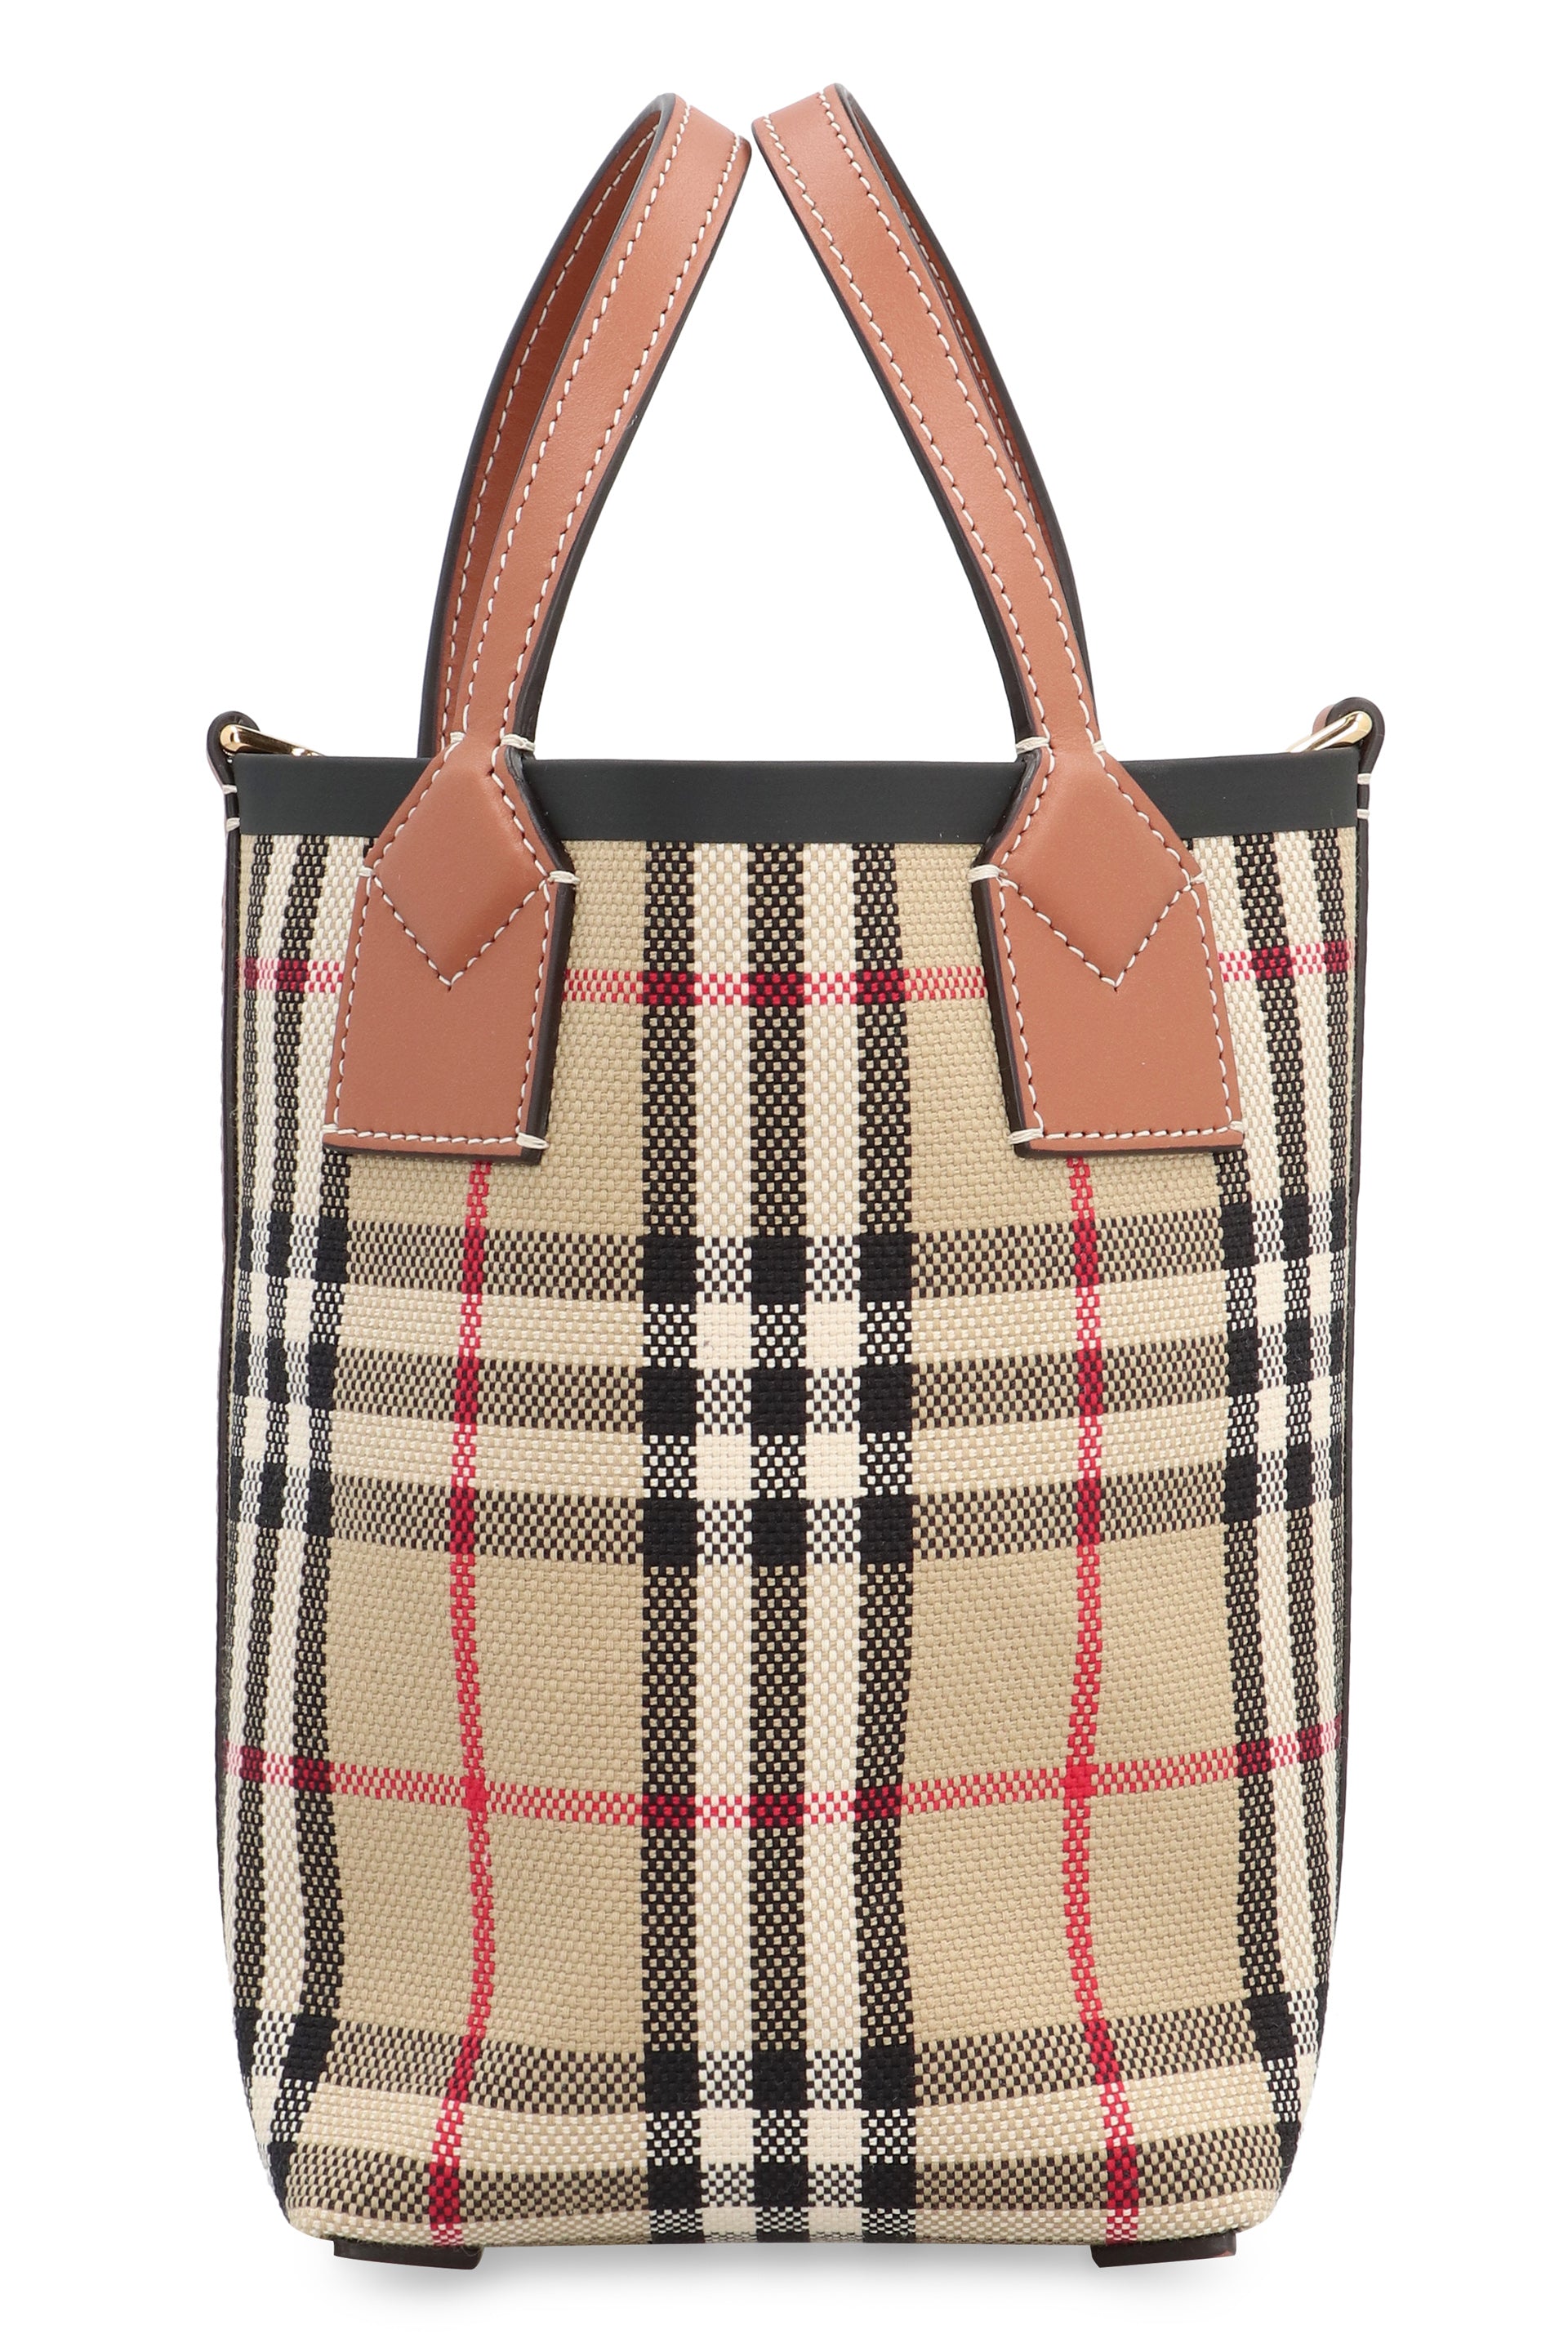 Shop Burberry Vintage Tan Check Tote Bag With Leather Handles And Removable Strap In Beige